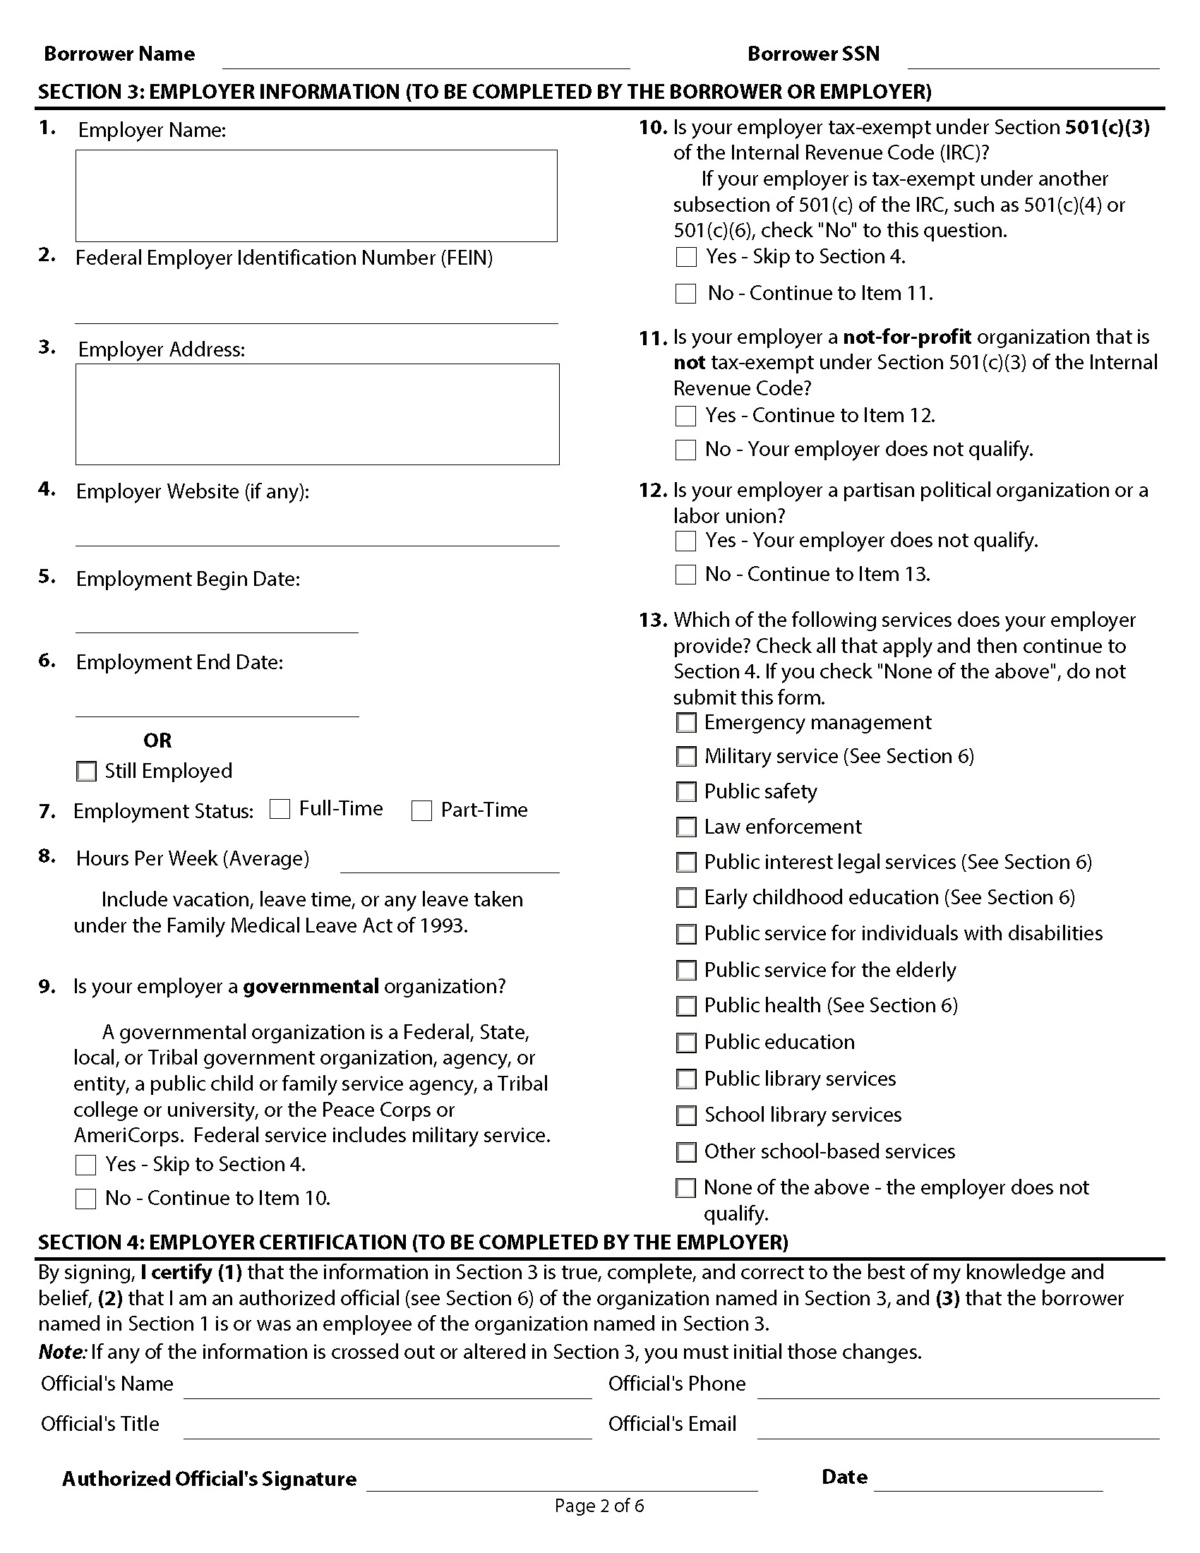 Where To Submit PSLF Form